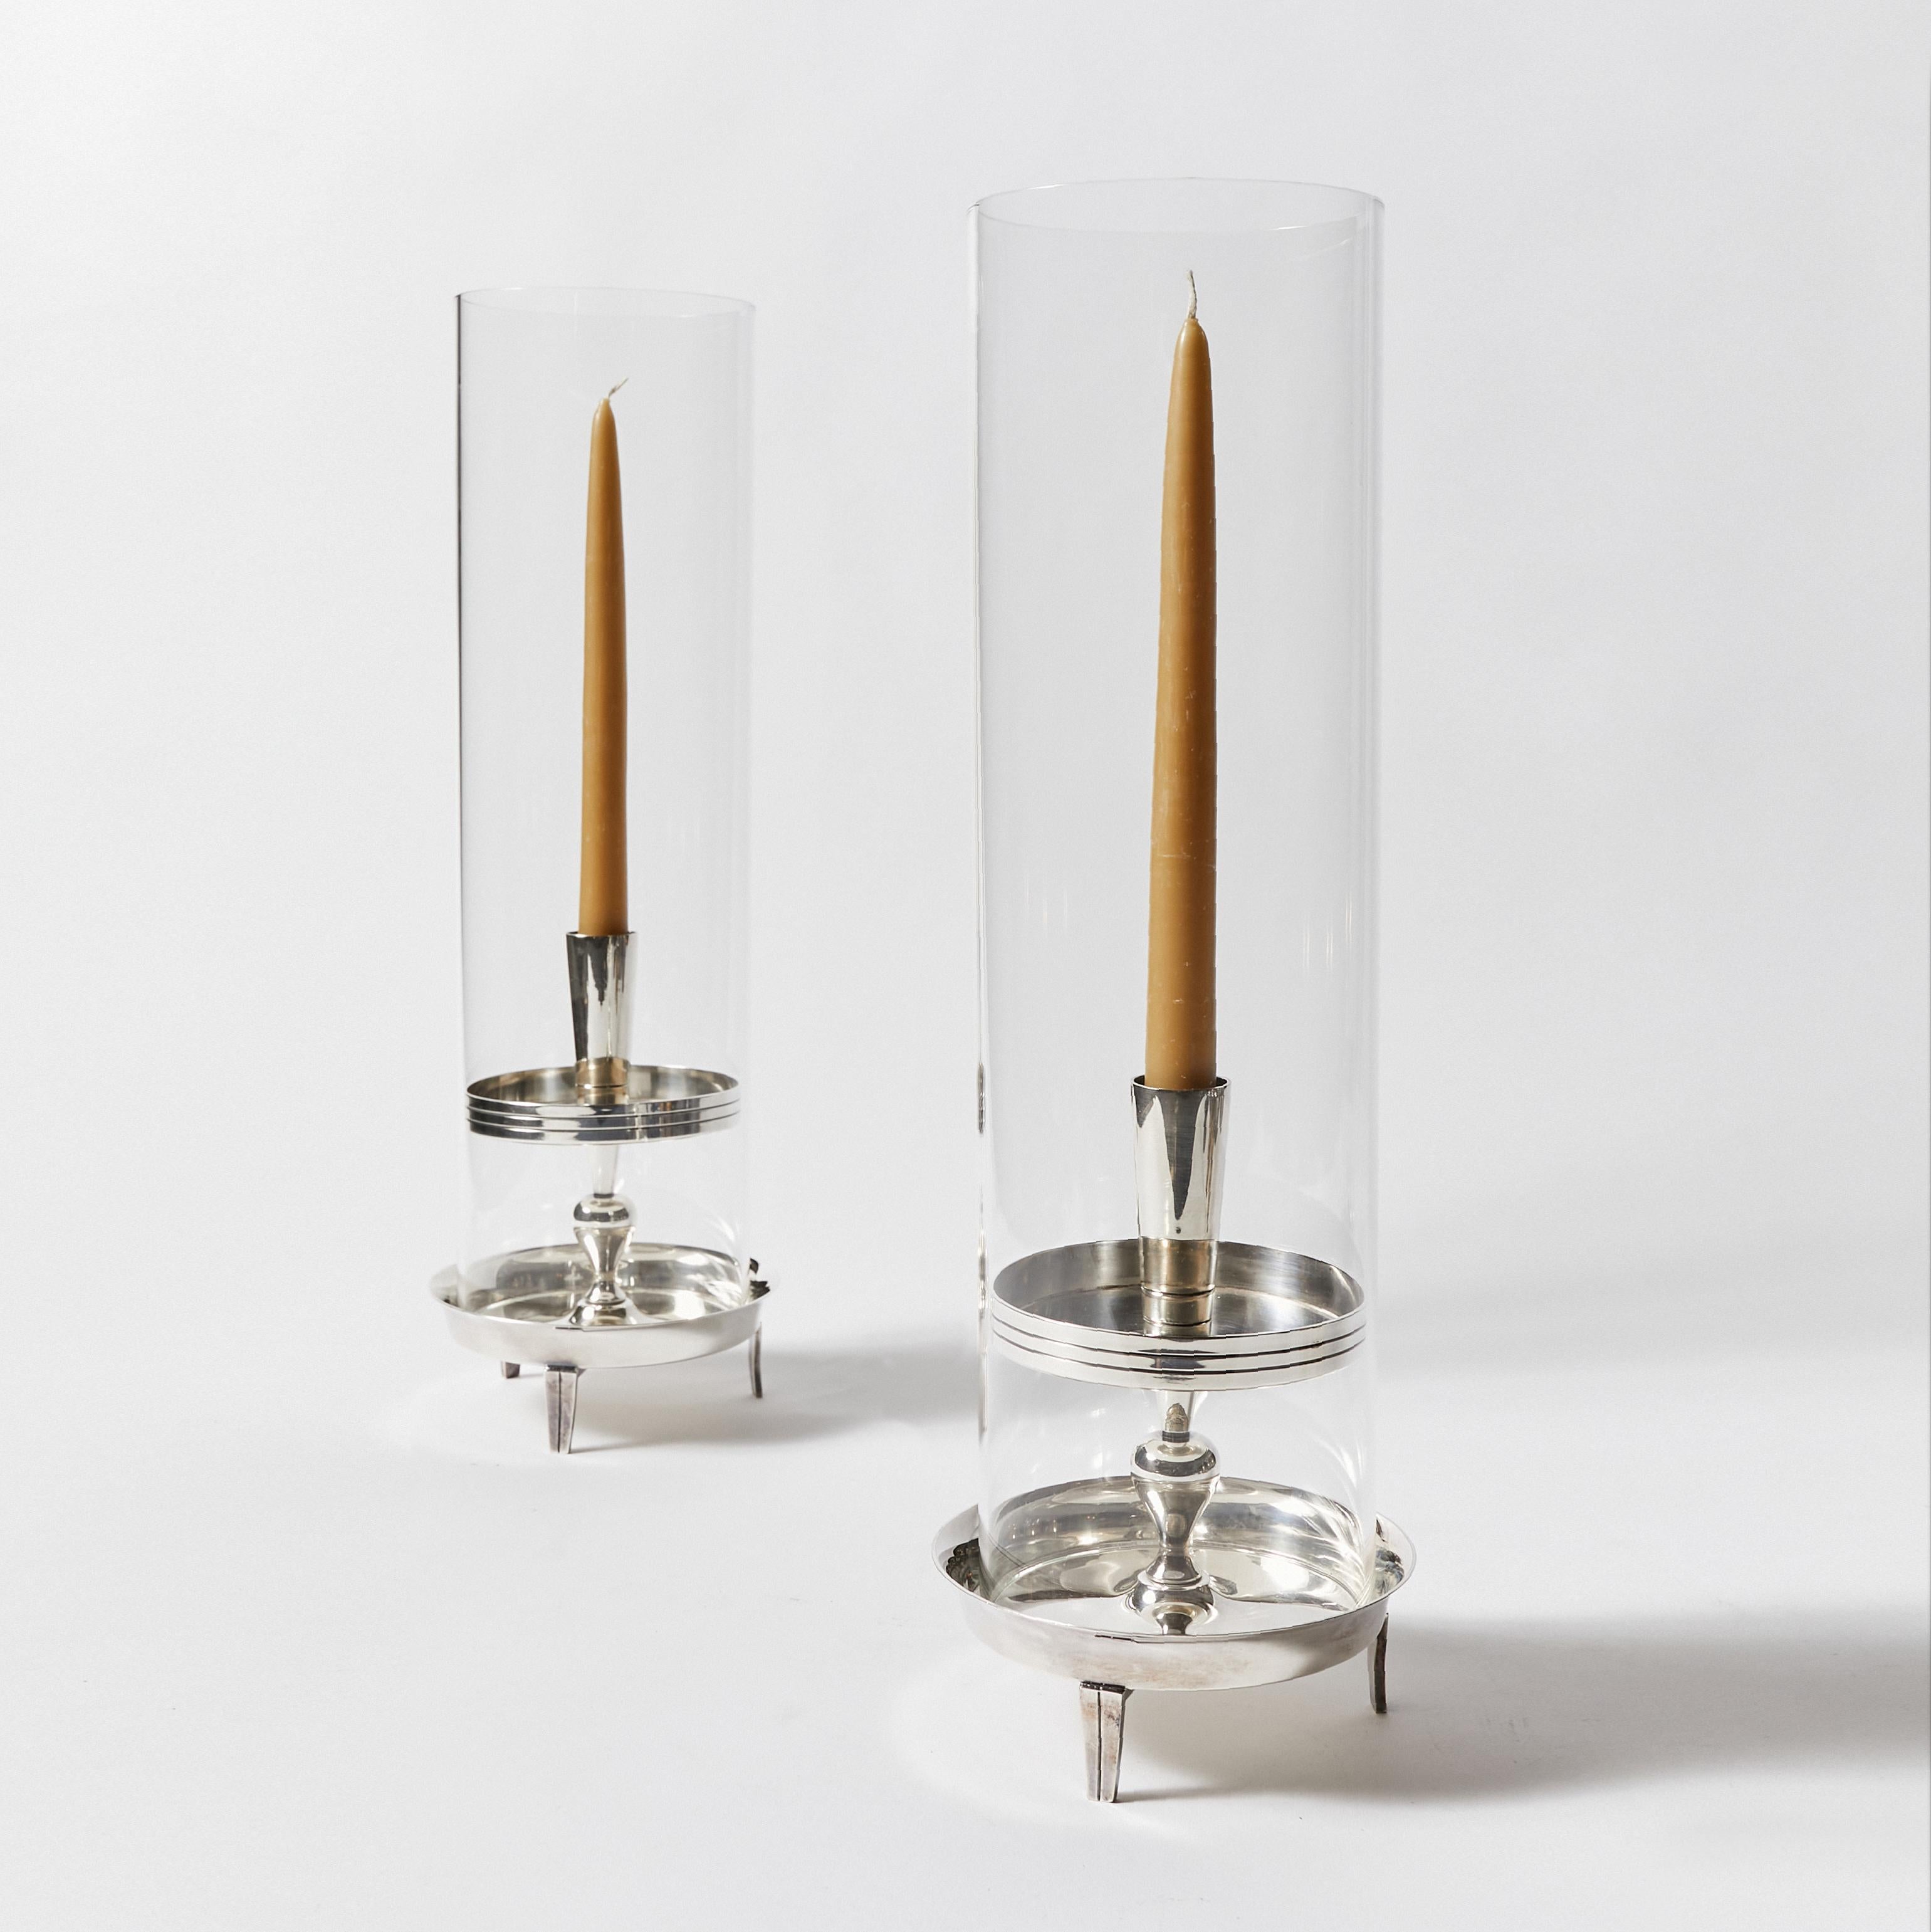 Set of three stylized tiered silver plated candle holders. Designed by Tommi Parzinger for Heirloom.